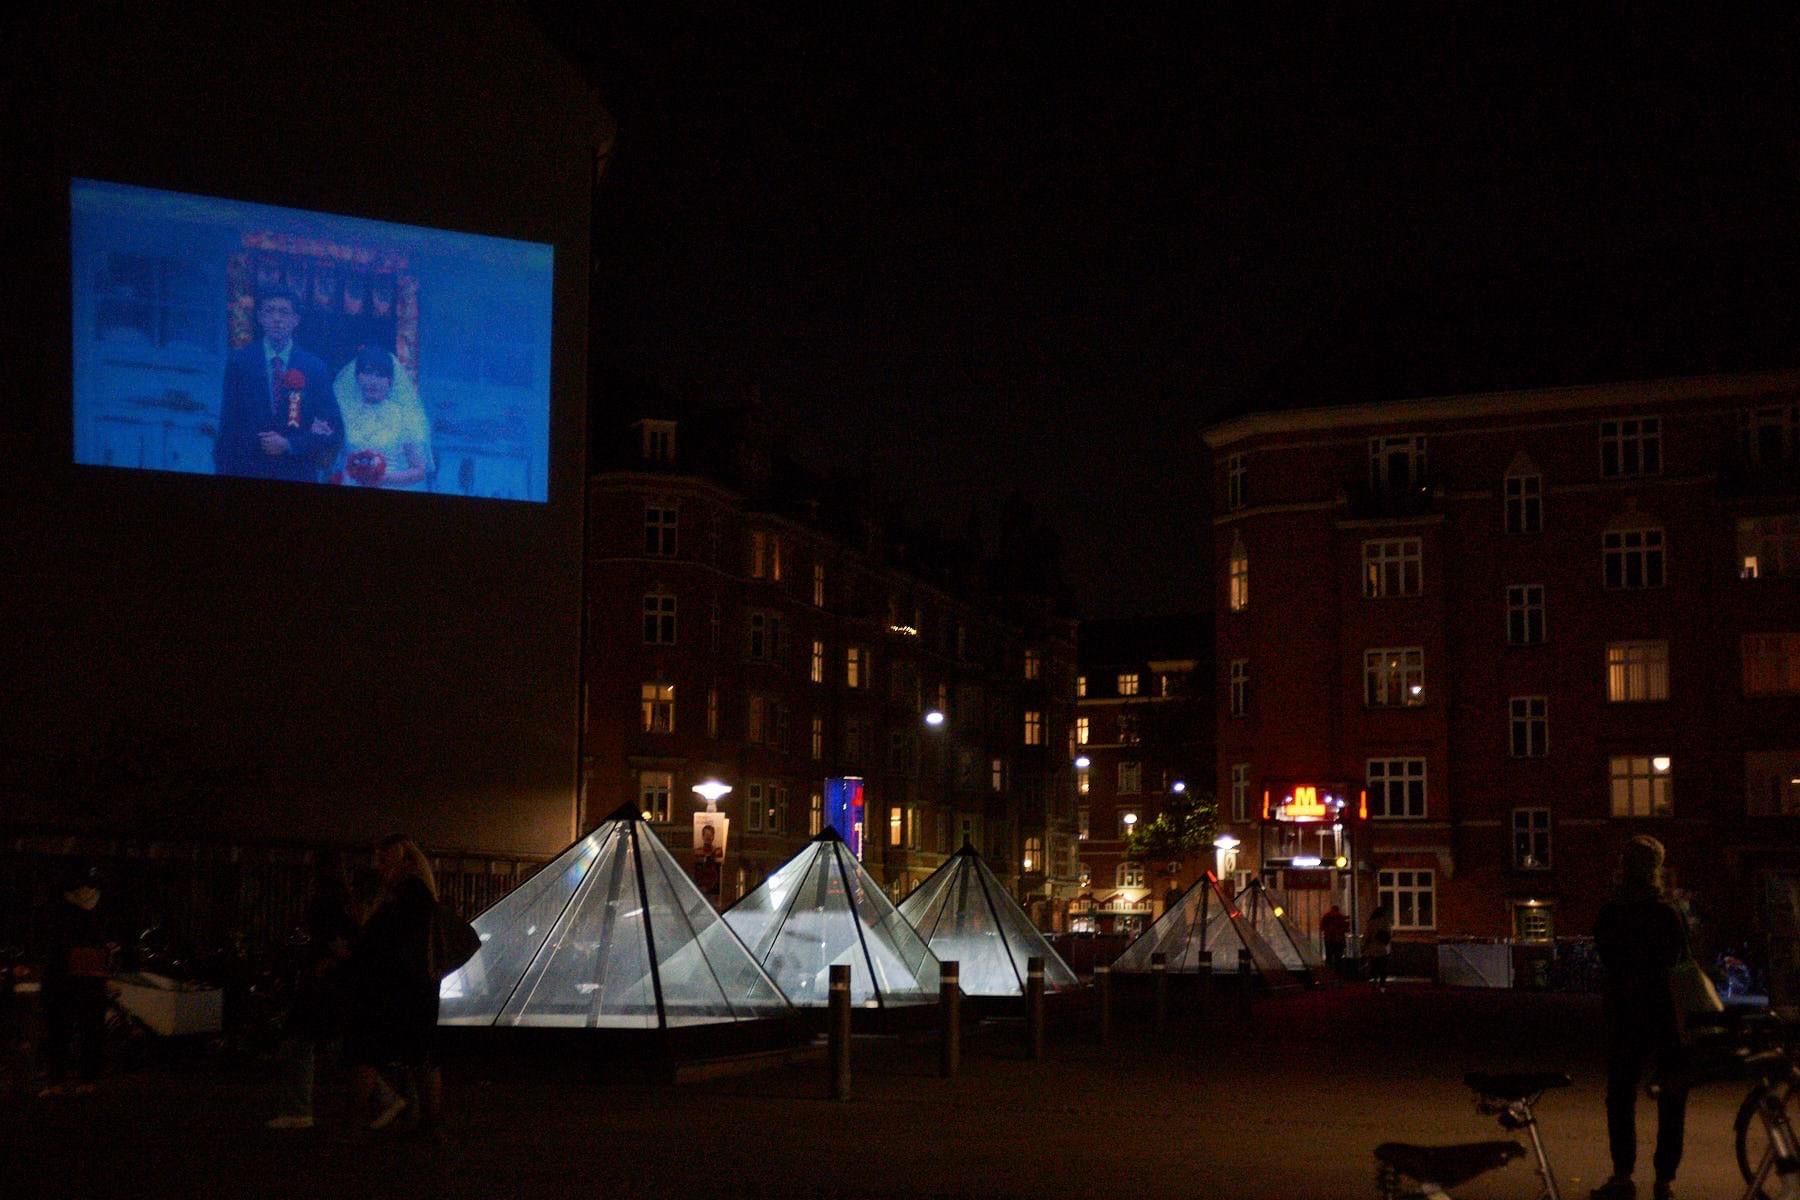 Residency artist Hong, Jun-Yuan’s video artwork, produced during his residency at Siao-Long Cultural Park, was selected for the “60 Seconds Festival” in Copenhagen. Image provided by Hong, Jun-Yuan 